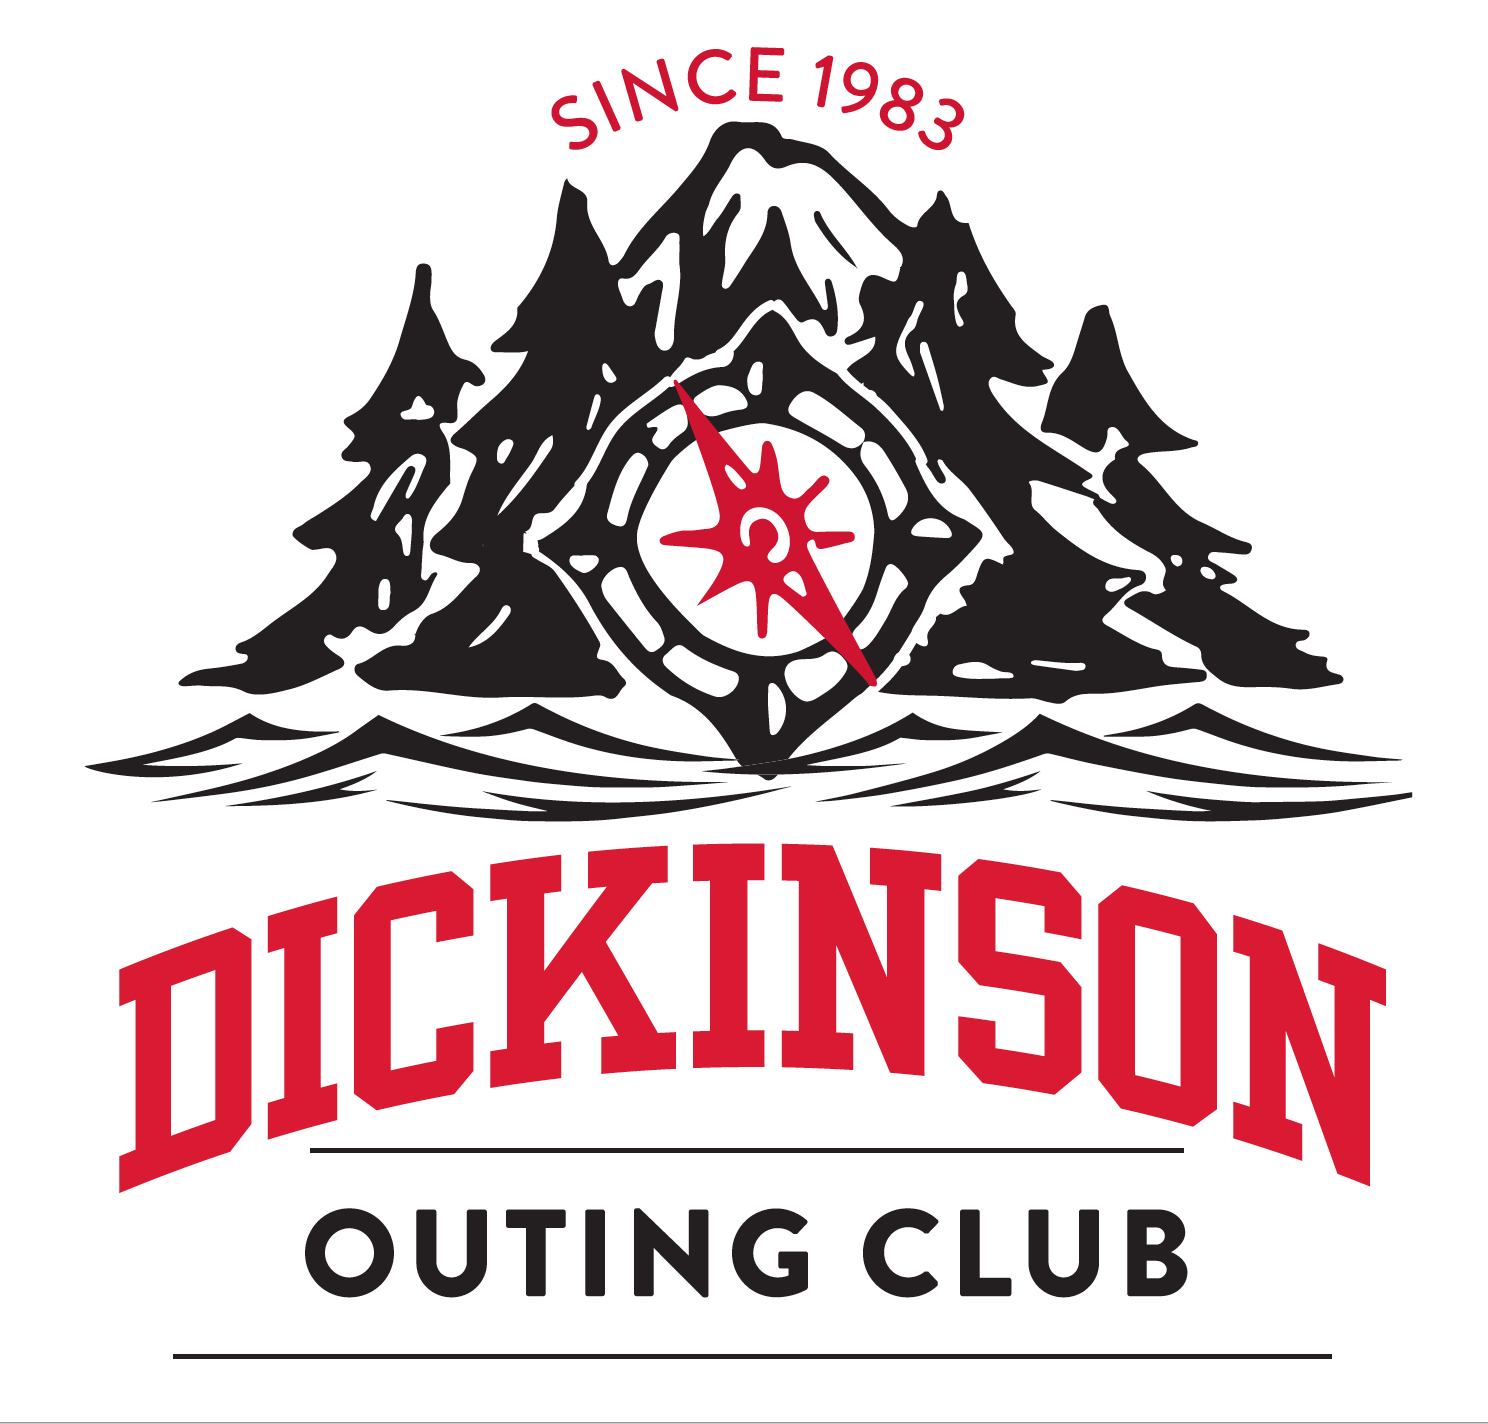 Dickinson Outing Club | We do stuff.